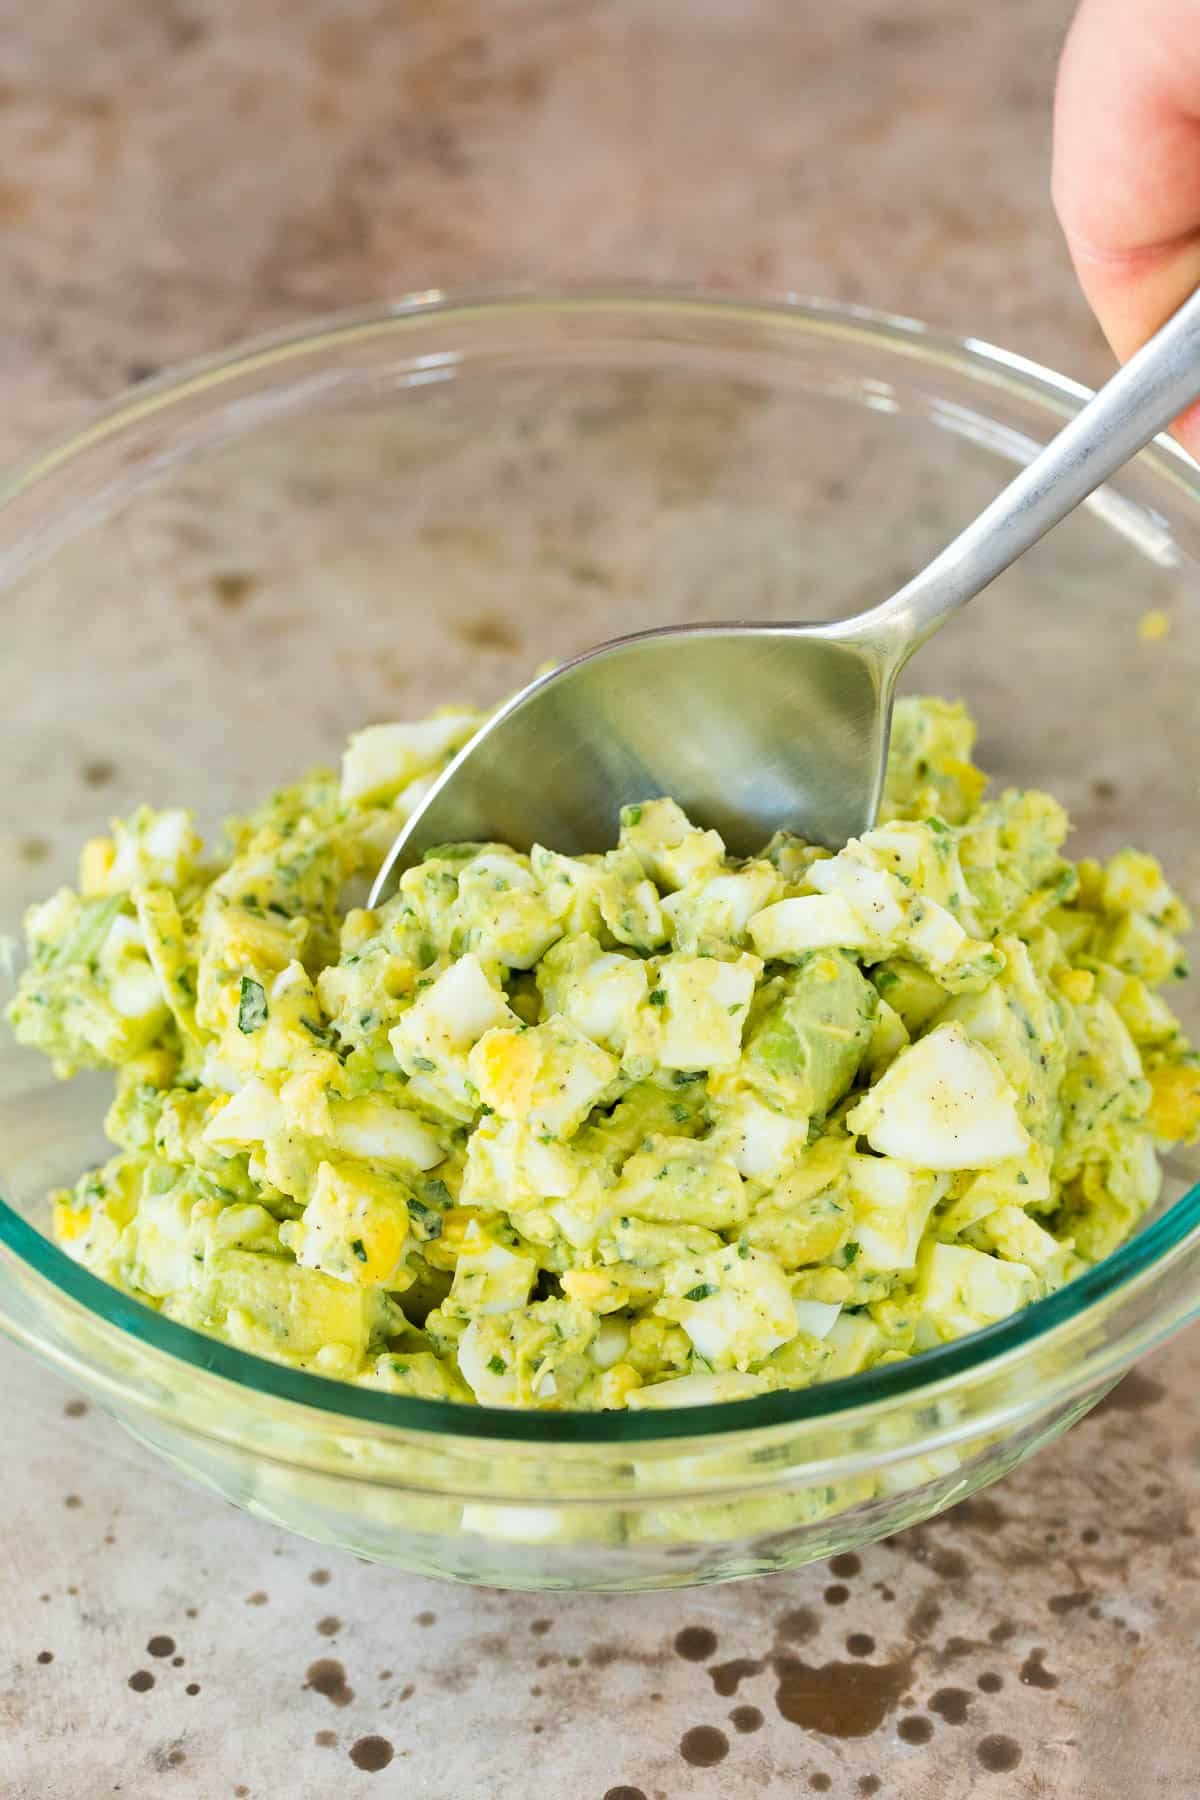 Eggs in a bowl with an avocado mayonnaise mixture.